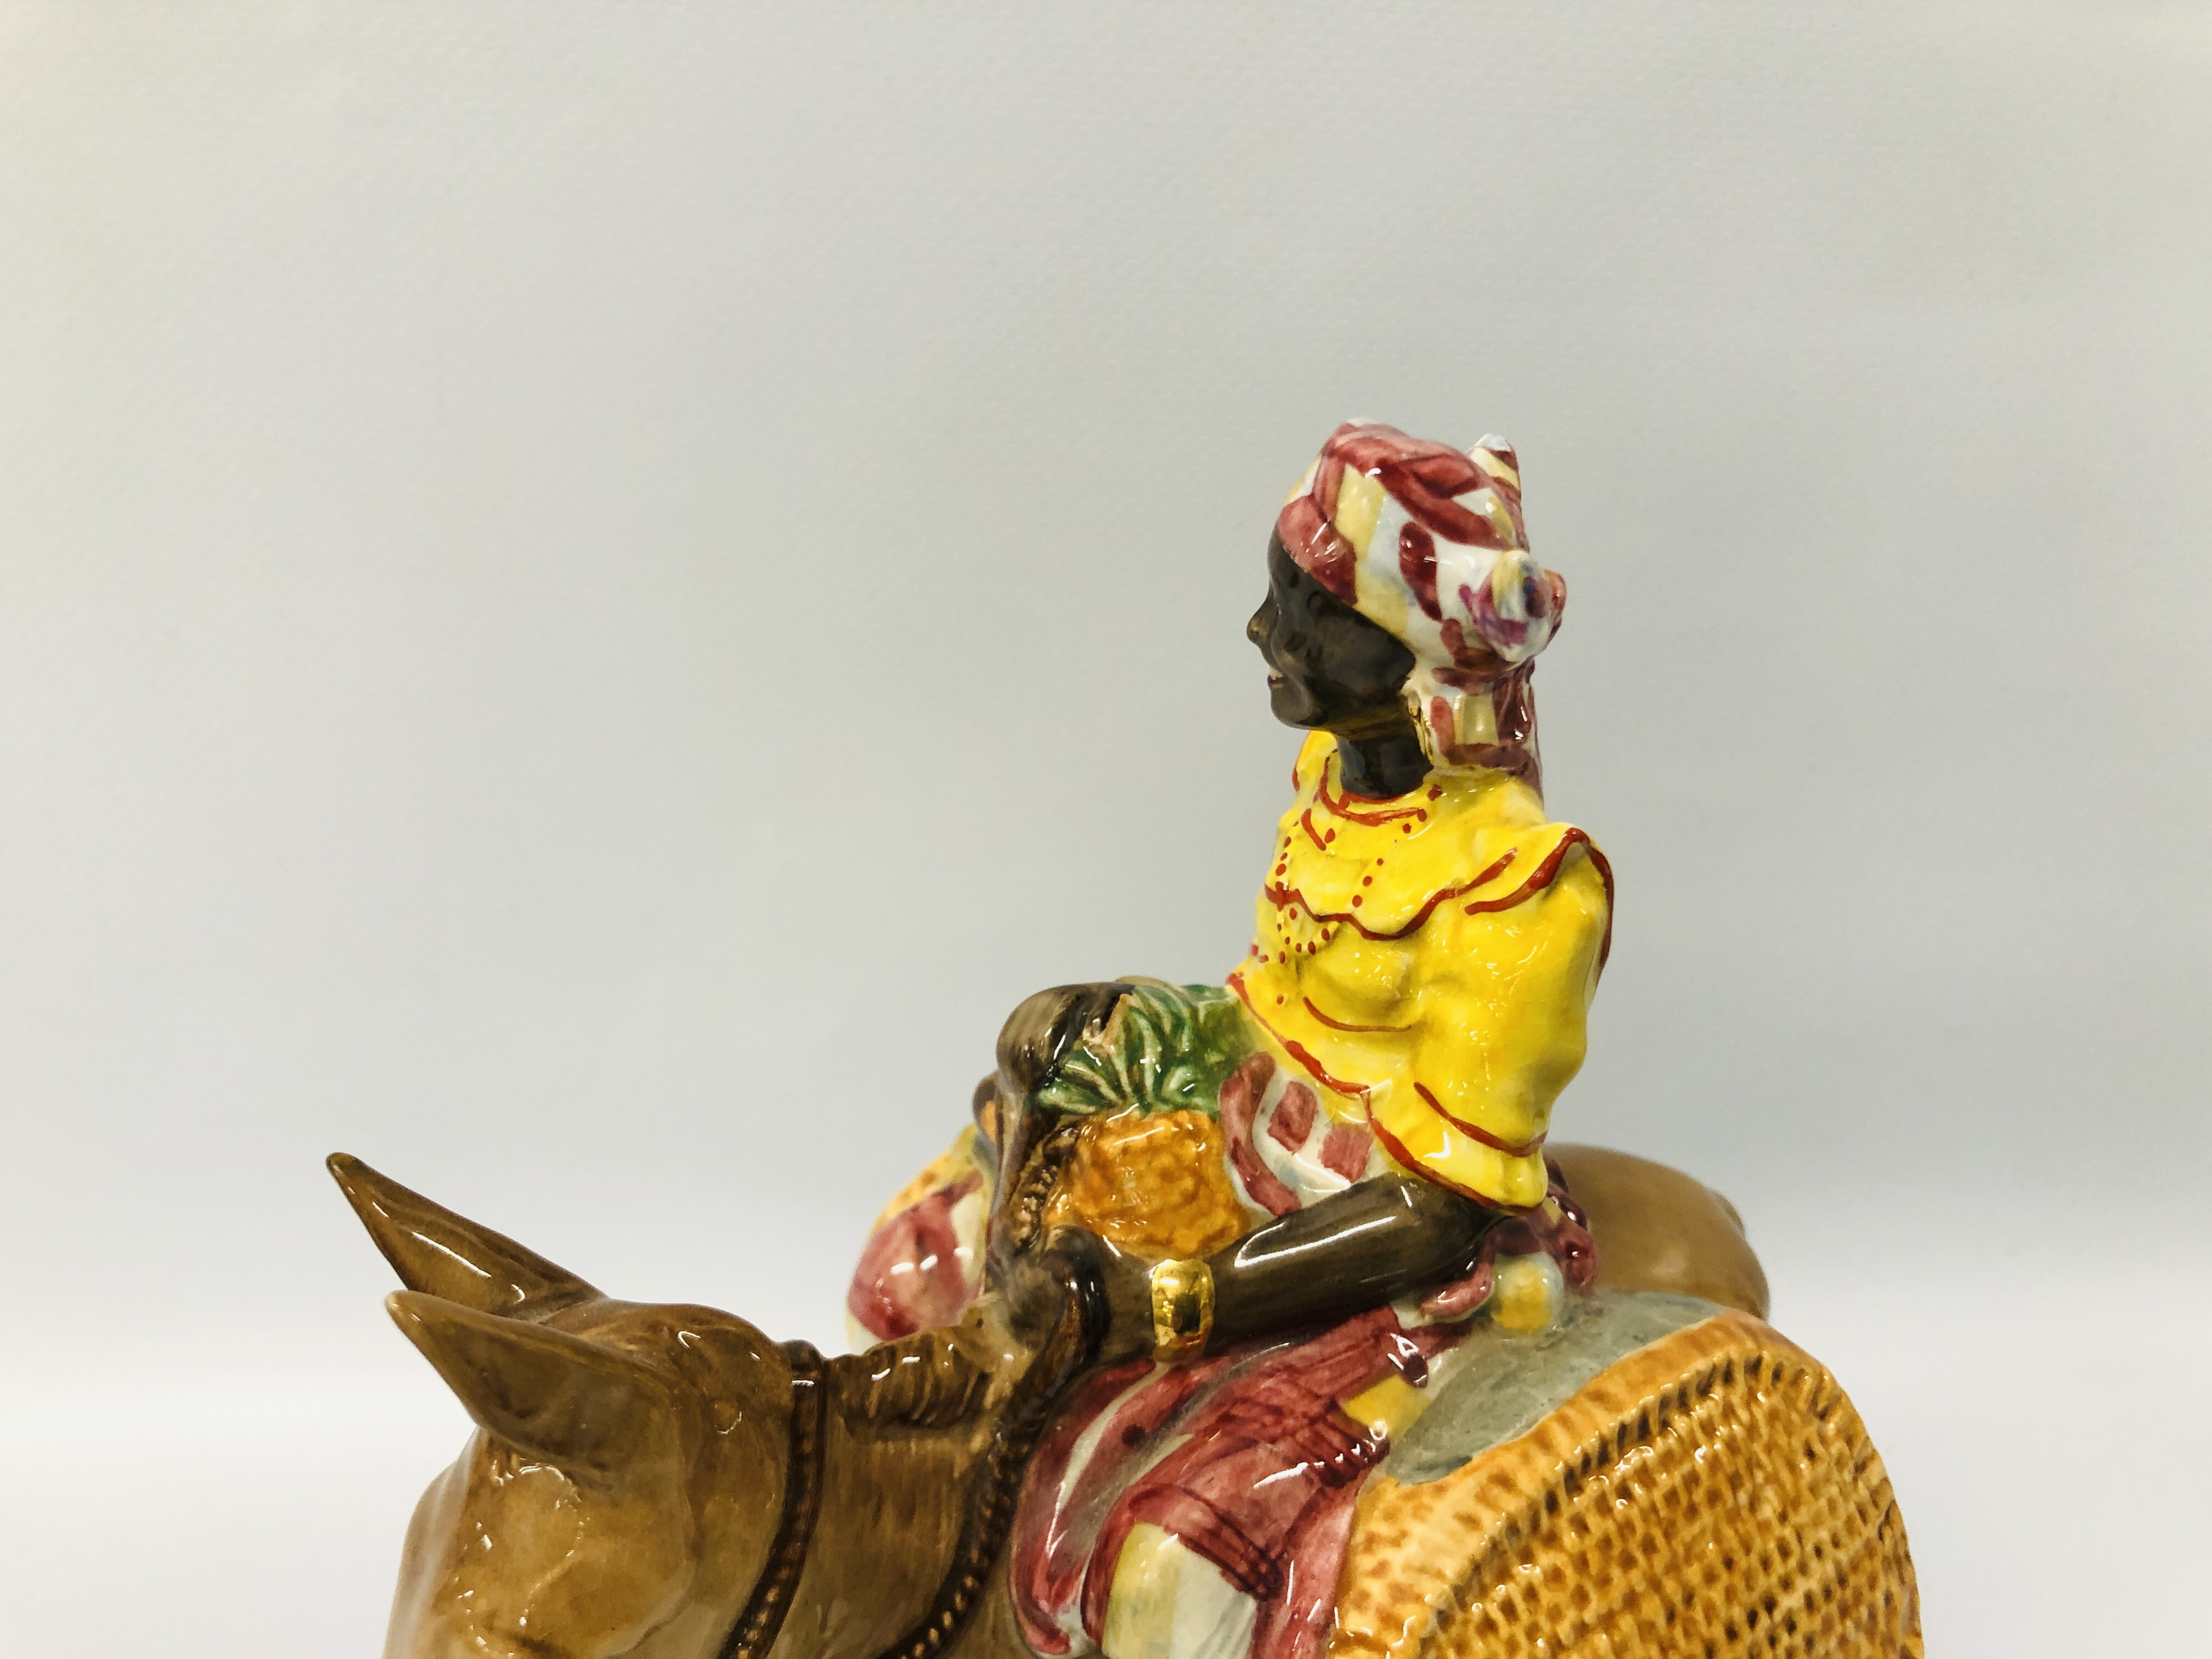 BESWICK "SUSIE JAMAICA" FIGURE ALONG WITH A MINIATURE BESWICK BENEAGLES WHISKY DECANTER (EMPTY) - Image 10 of 13